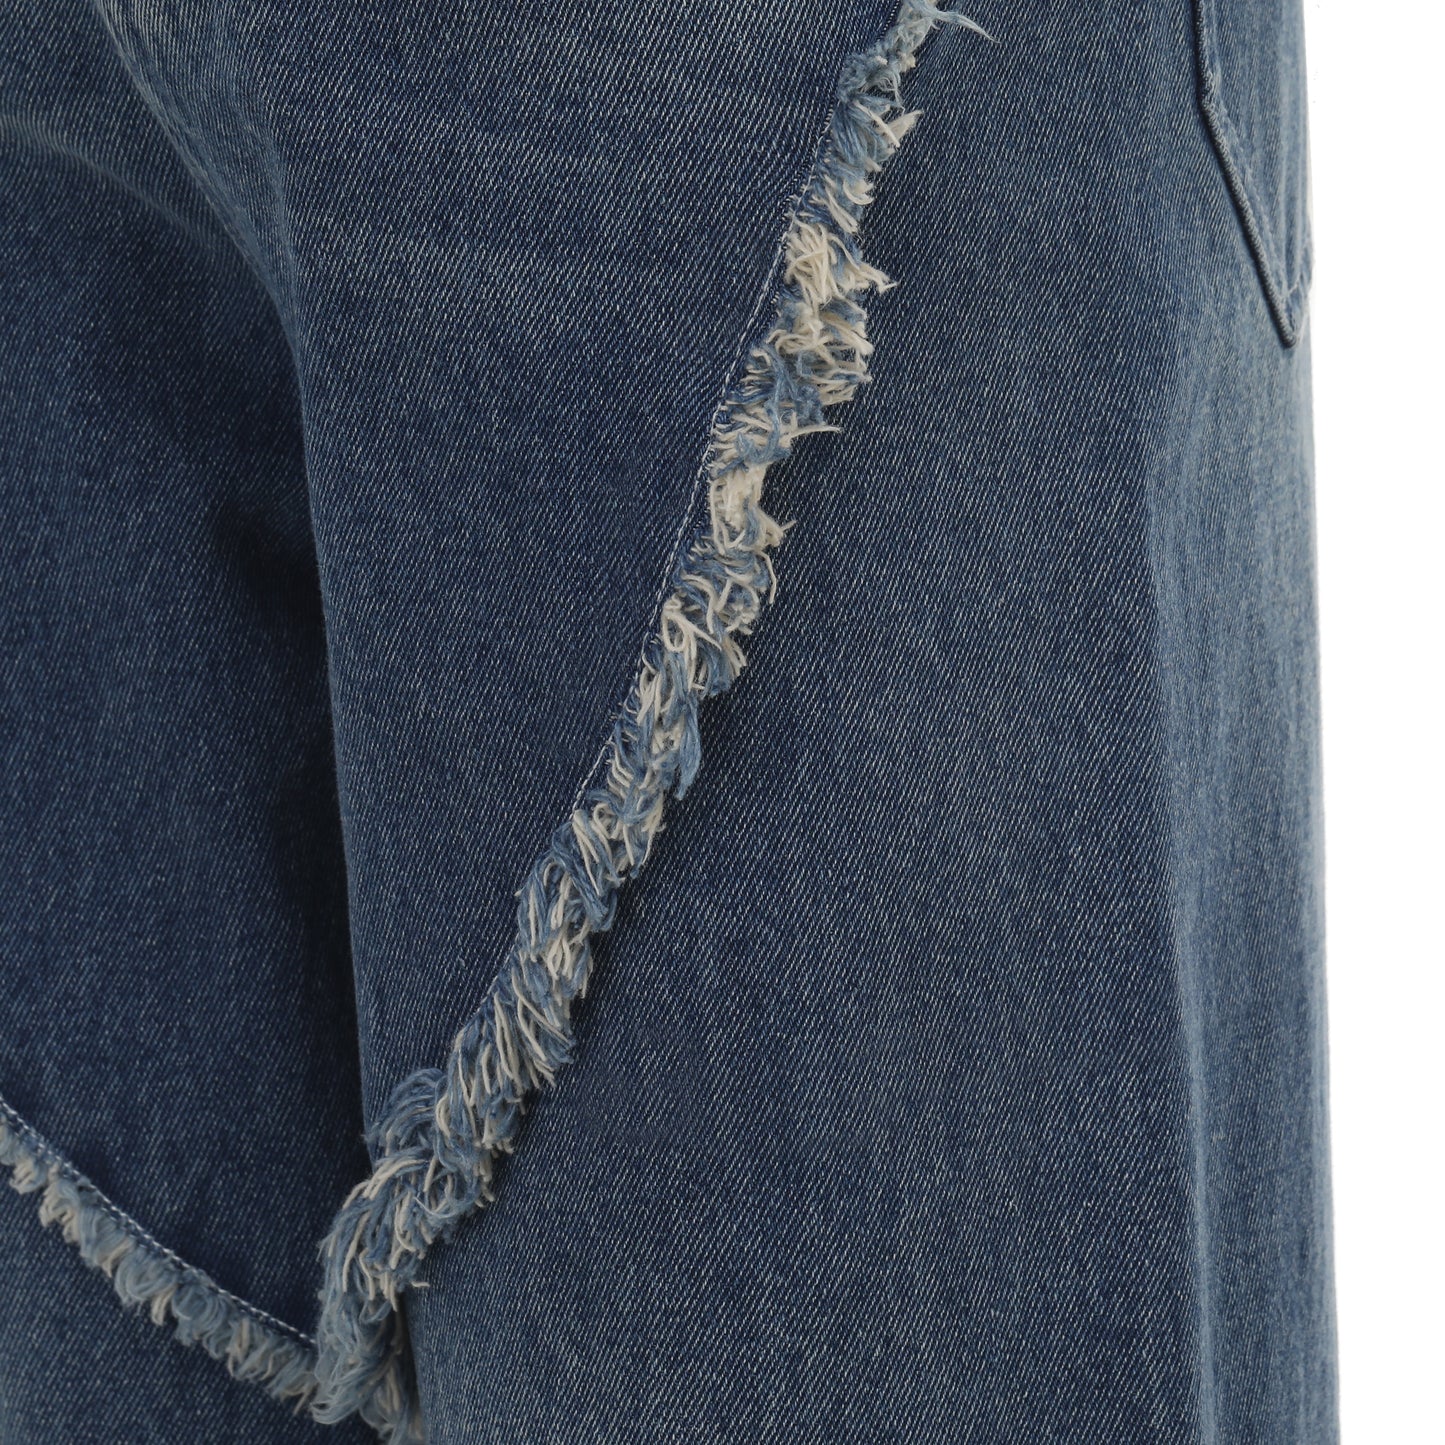 Spiral Cut Washed Jeans